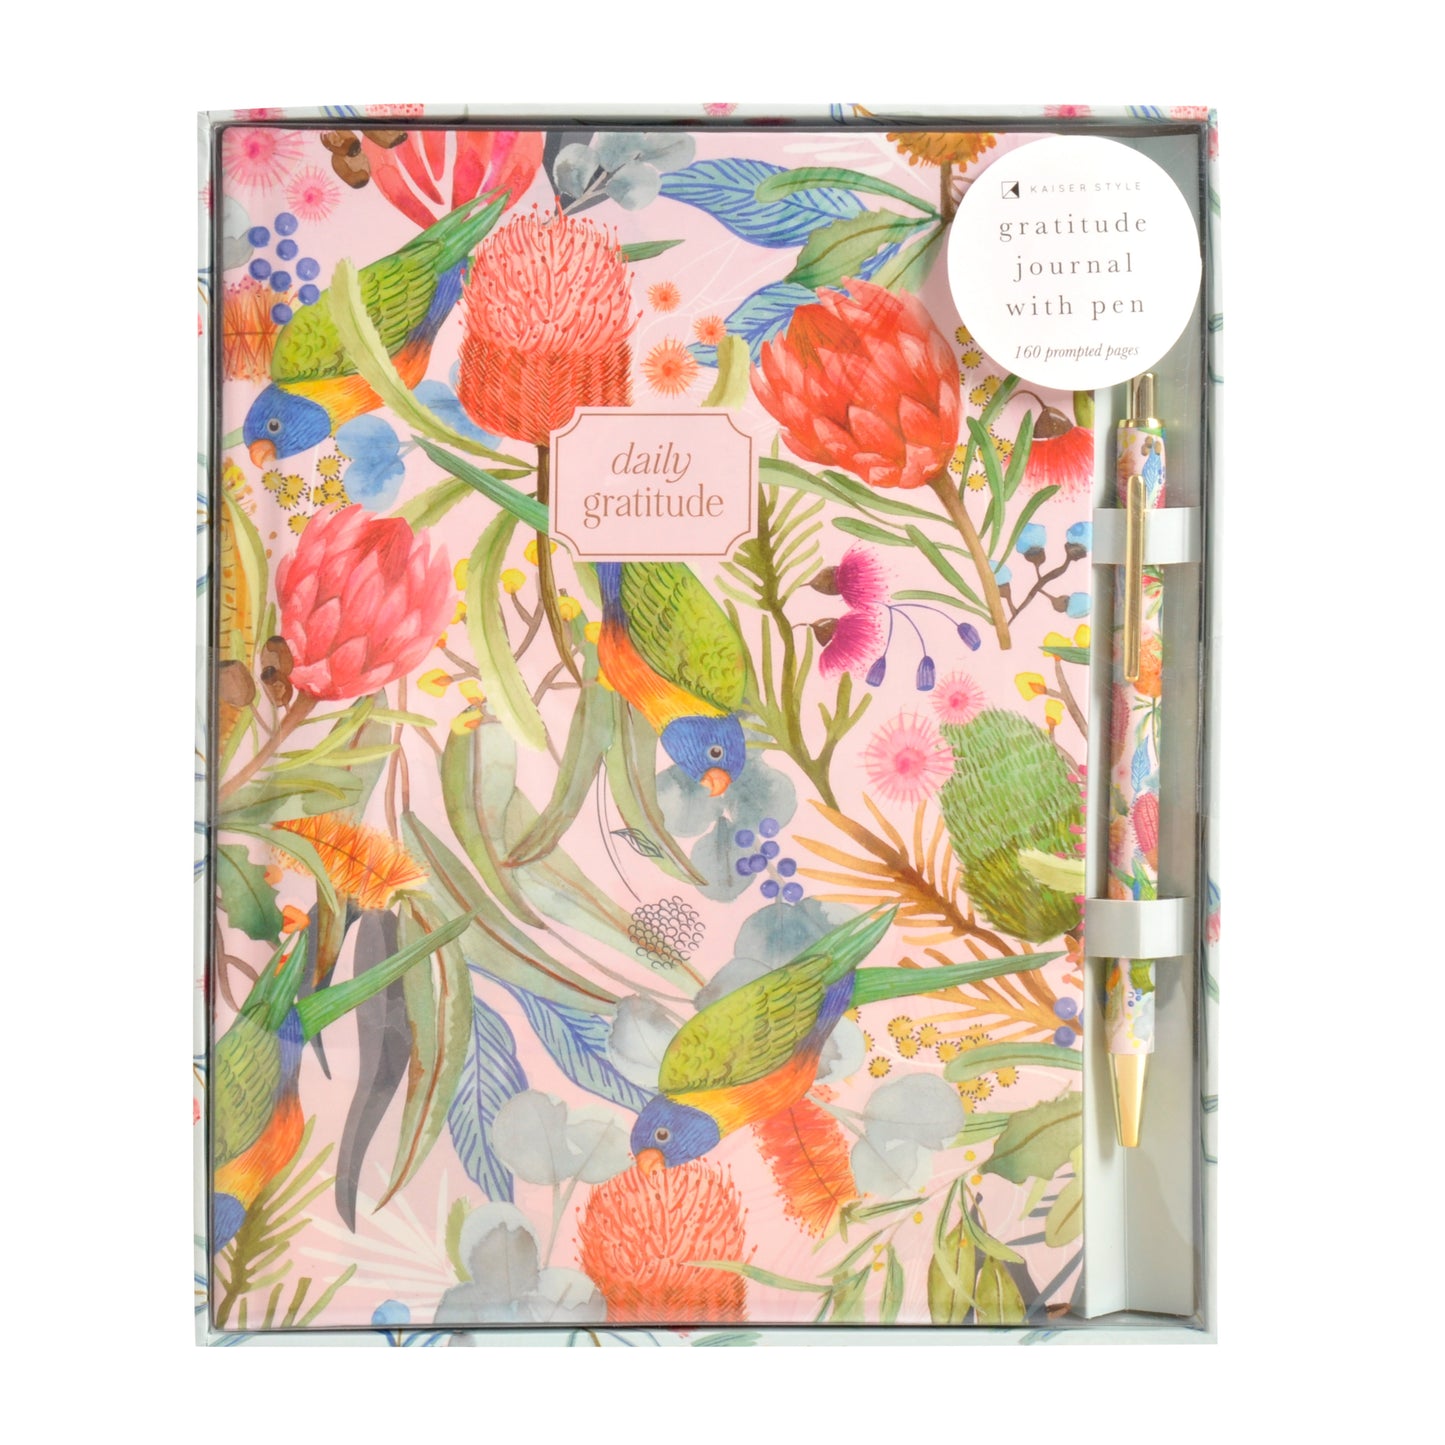 Prompted Journal With Pen - Native Soiree